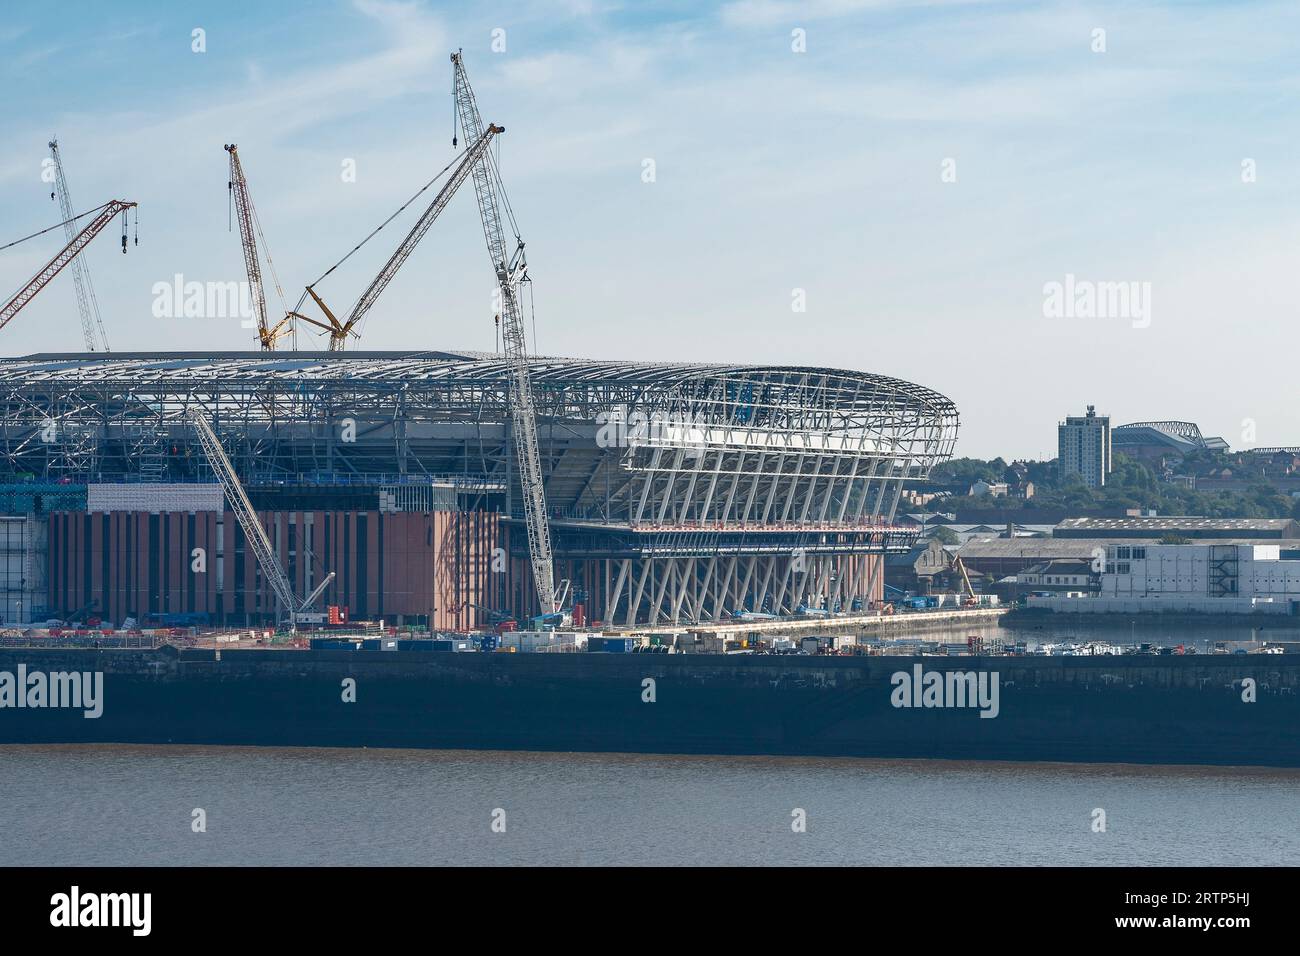 The new stadium for Everton Football Club under construction in Liverpool with Anfield in the background Stock Photo